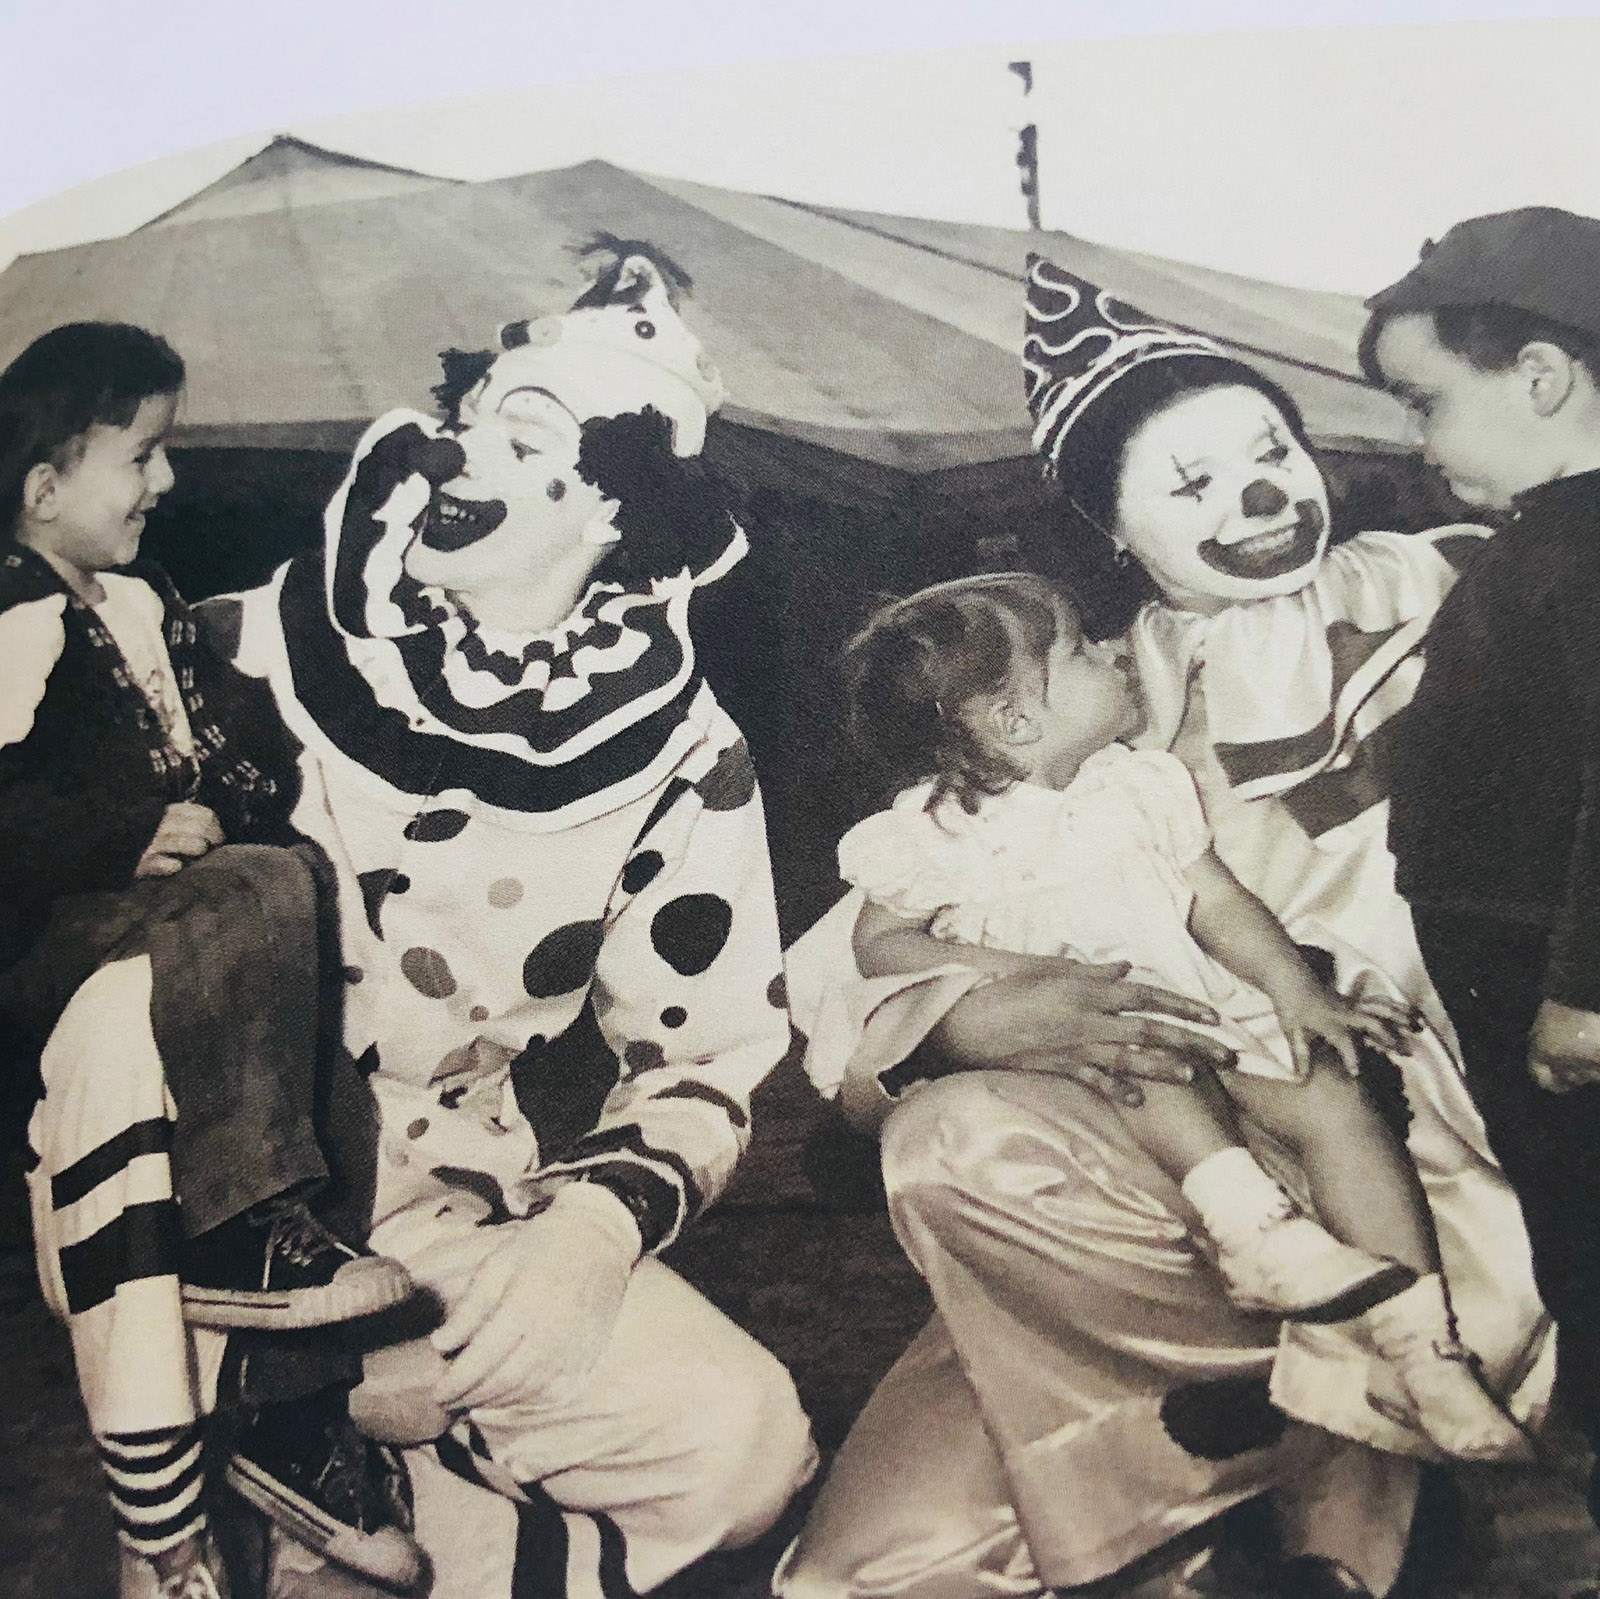 black and white photo of clowns in the sixties